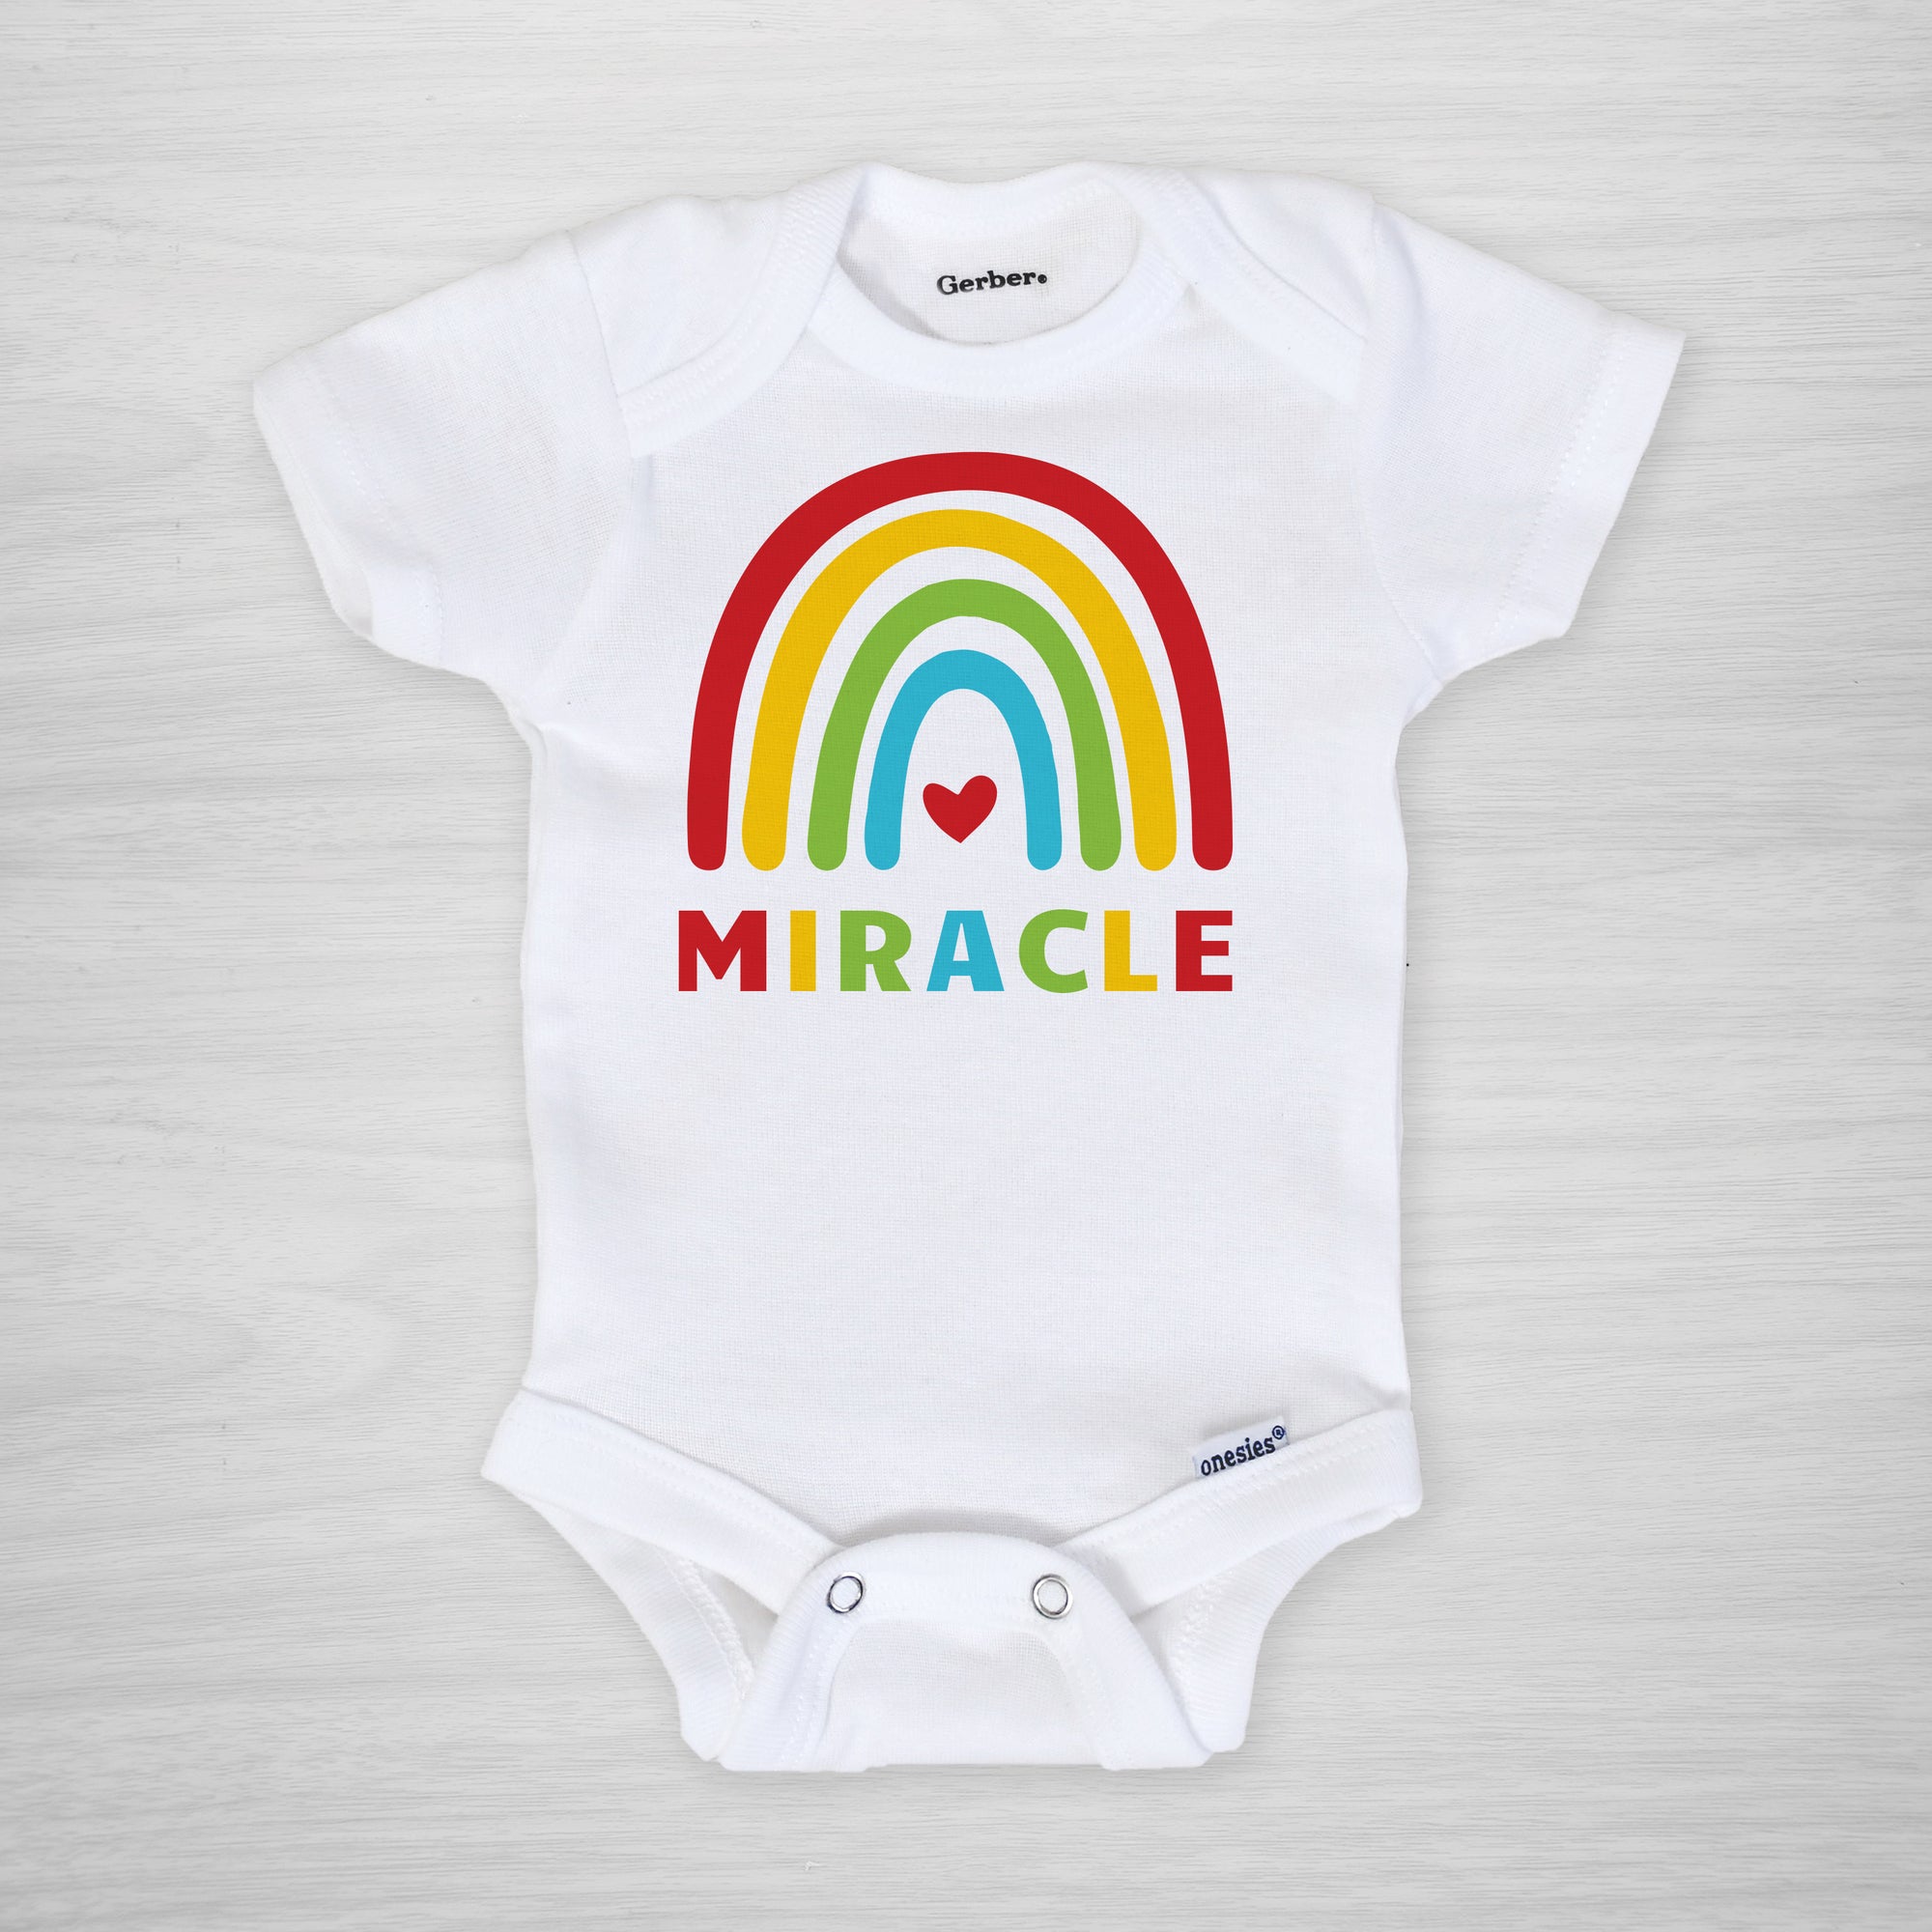 Tiny Miracle Baby Vest Miracle Baby Grow IVF Baby Vest Rainbow